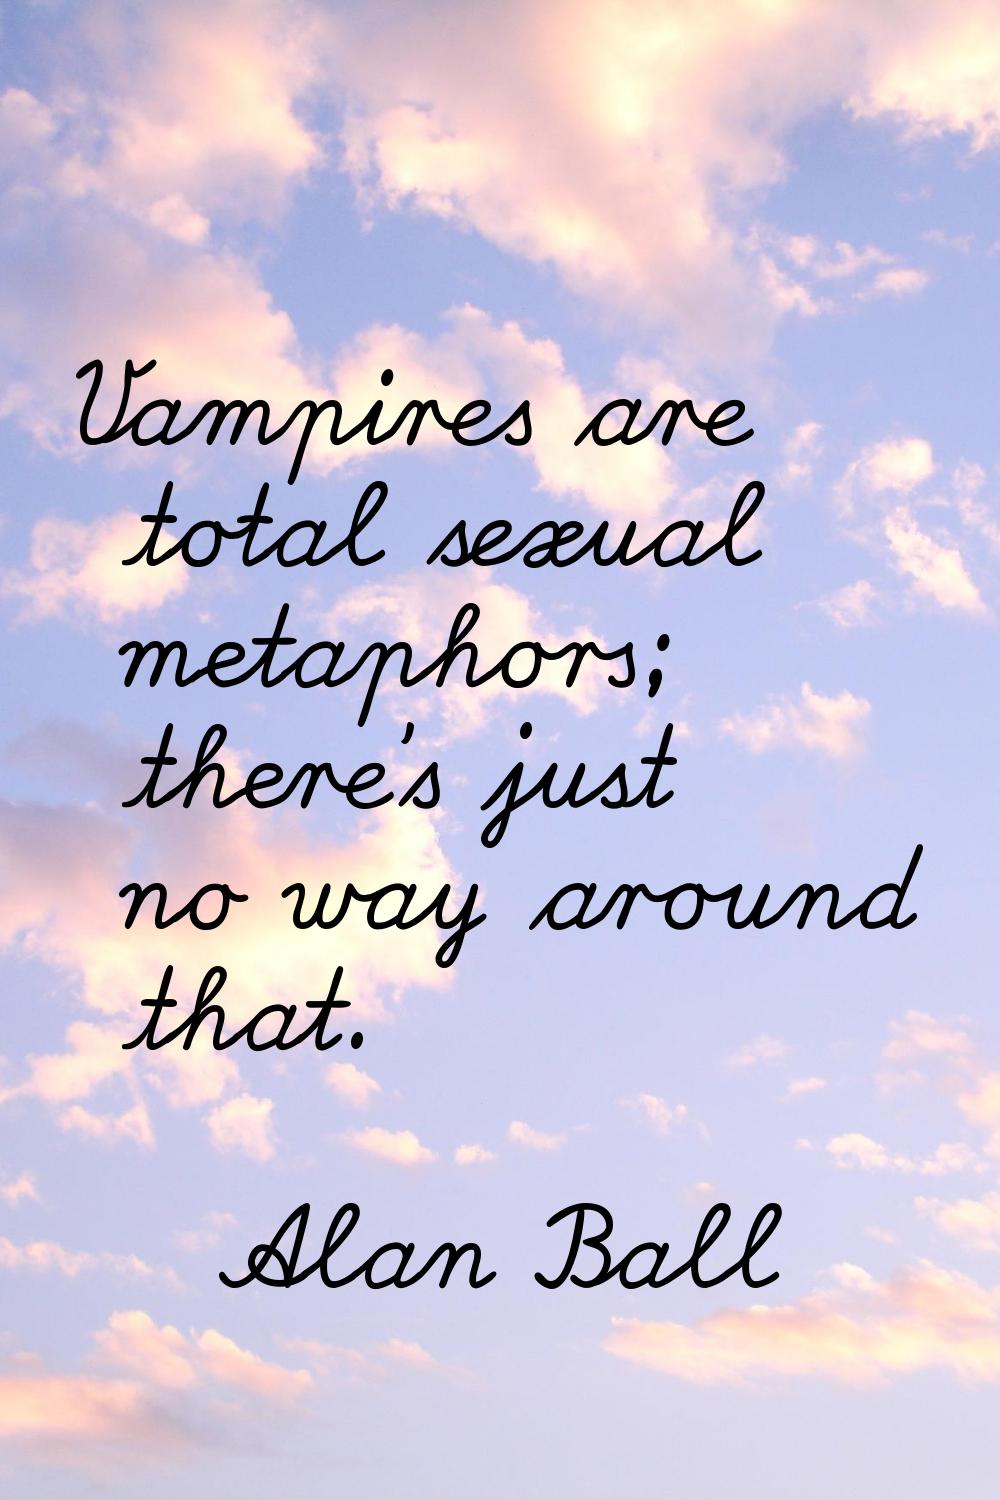 Vampires are total sexual metaphors; there's just no way around that.